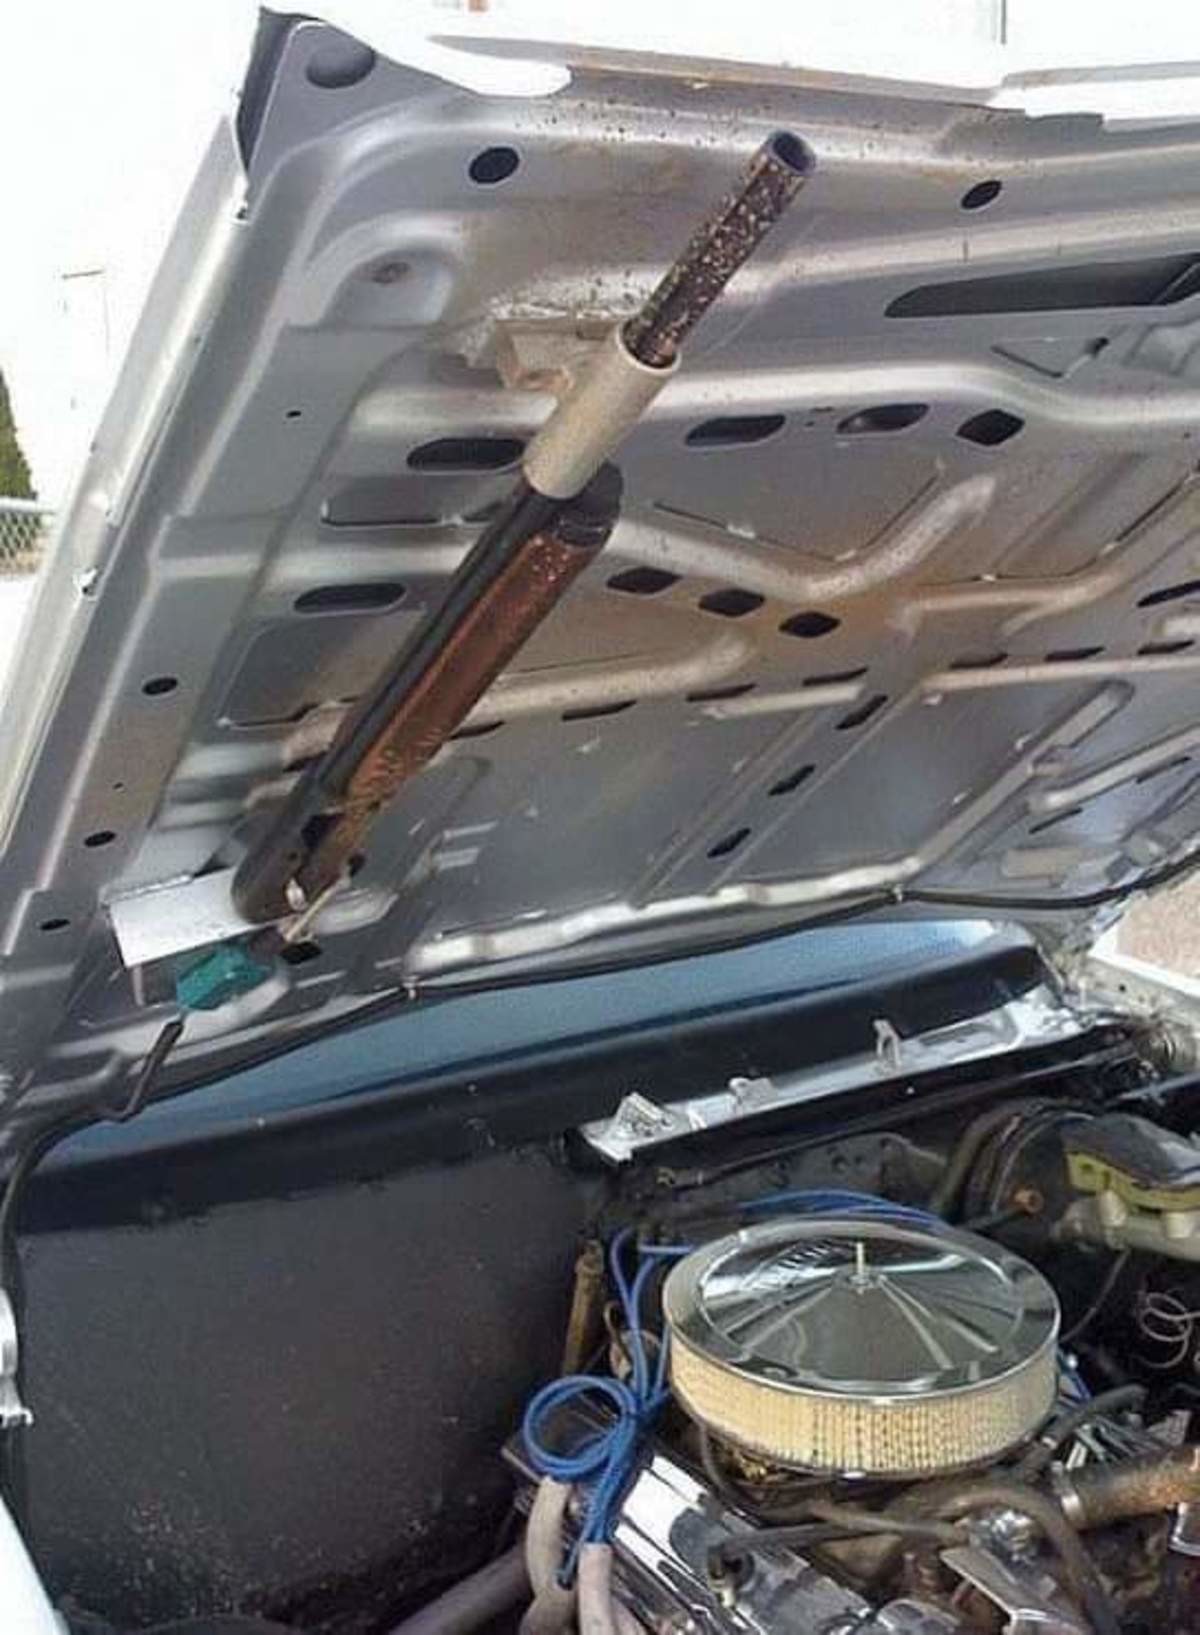 Twisted Metal. Police in Springfield MA discover a shotgun installed in the hood of this vehicle. A trigger mechanism was found in the passenger side... I feel bad for the gun.